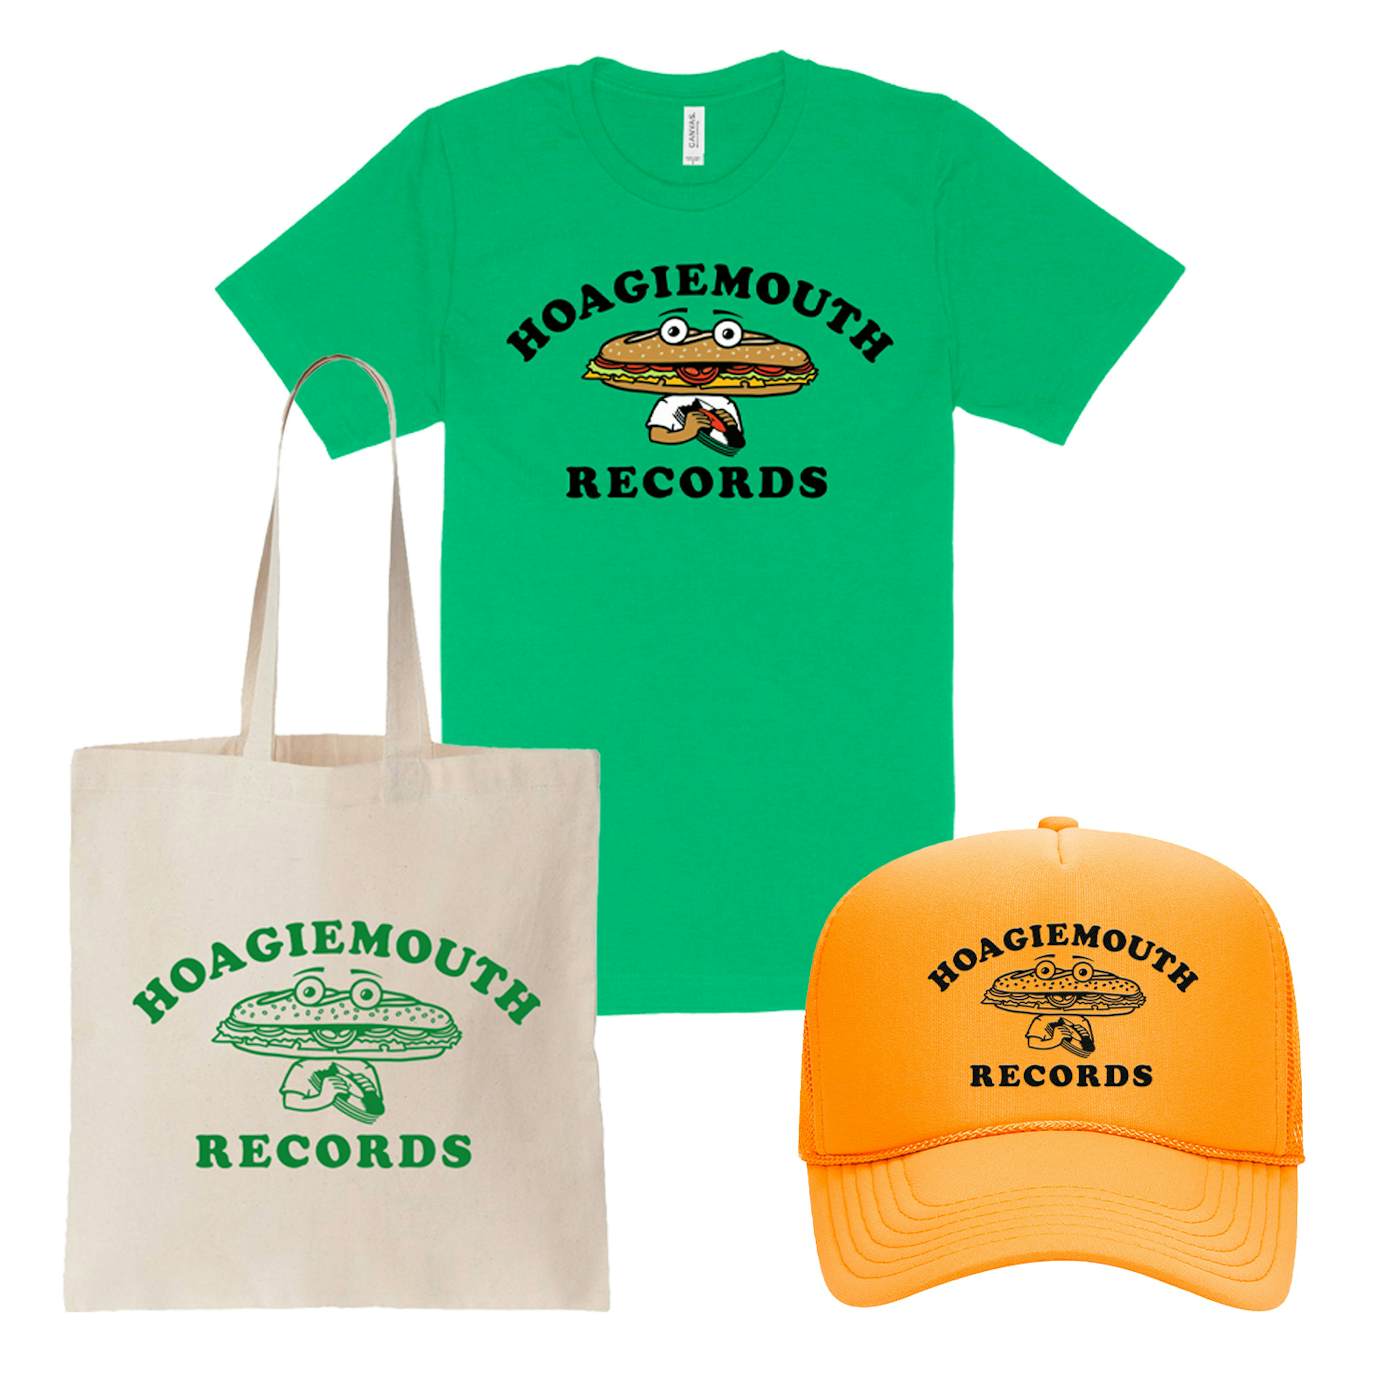 Amos Lee Hoagiemouth Records Merch Madness Bundle